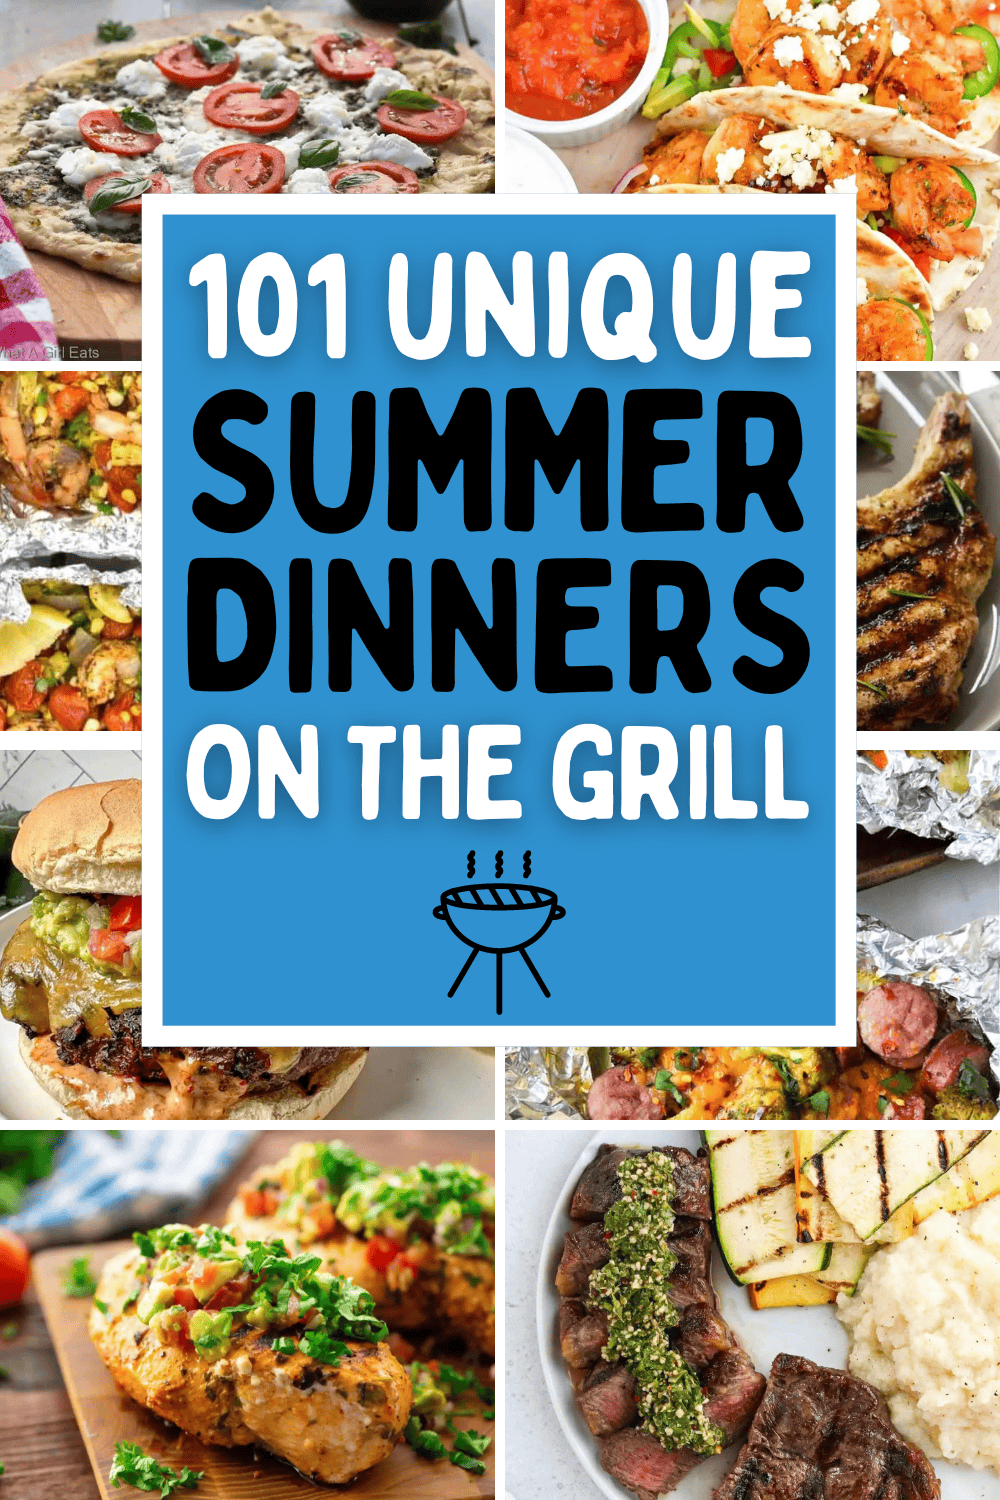 Fun summer grilling recipes for dinner! Easy things to grill for dinner, like flavorful recipes for grilled chicken, steak, ground beef burgers, pork loin, brisket, sausage, seafood and more! Easy grilling recipes simple healthy, grilled dinner ideas summer easy, summer grilling recipes dinner meals, what to grill for dinner meat, grill meals for a crowd, grilled food ideas outdoor, cookout food, bbq menu, man food, dinners on the grill ideas, summer dinner ideas grill bbq, summer grill recipes.